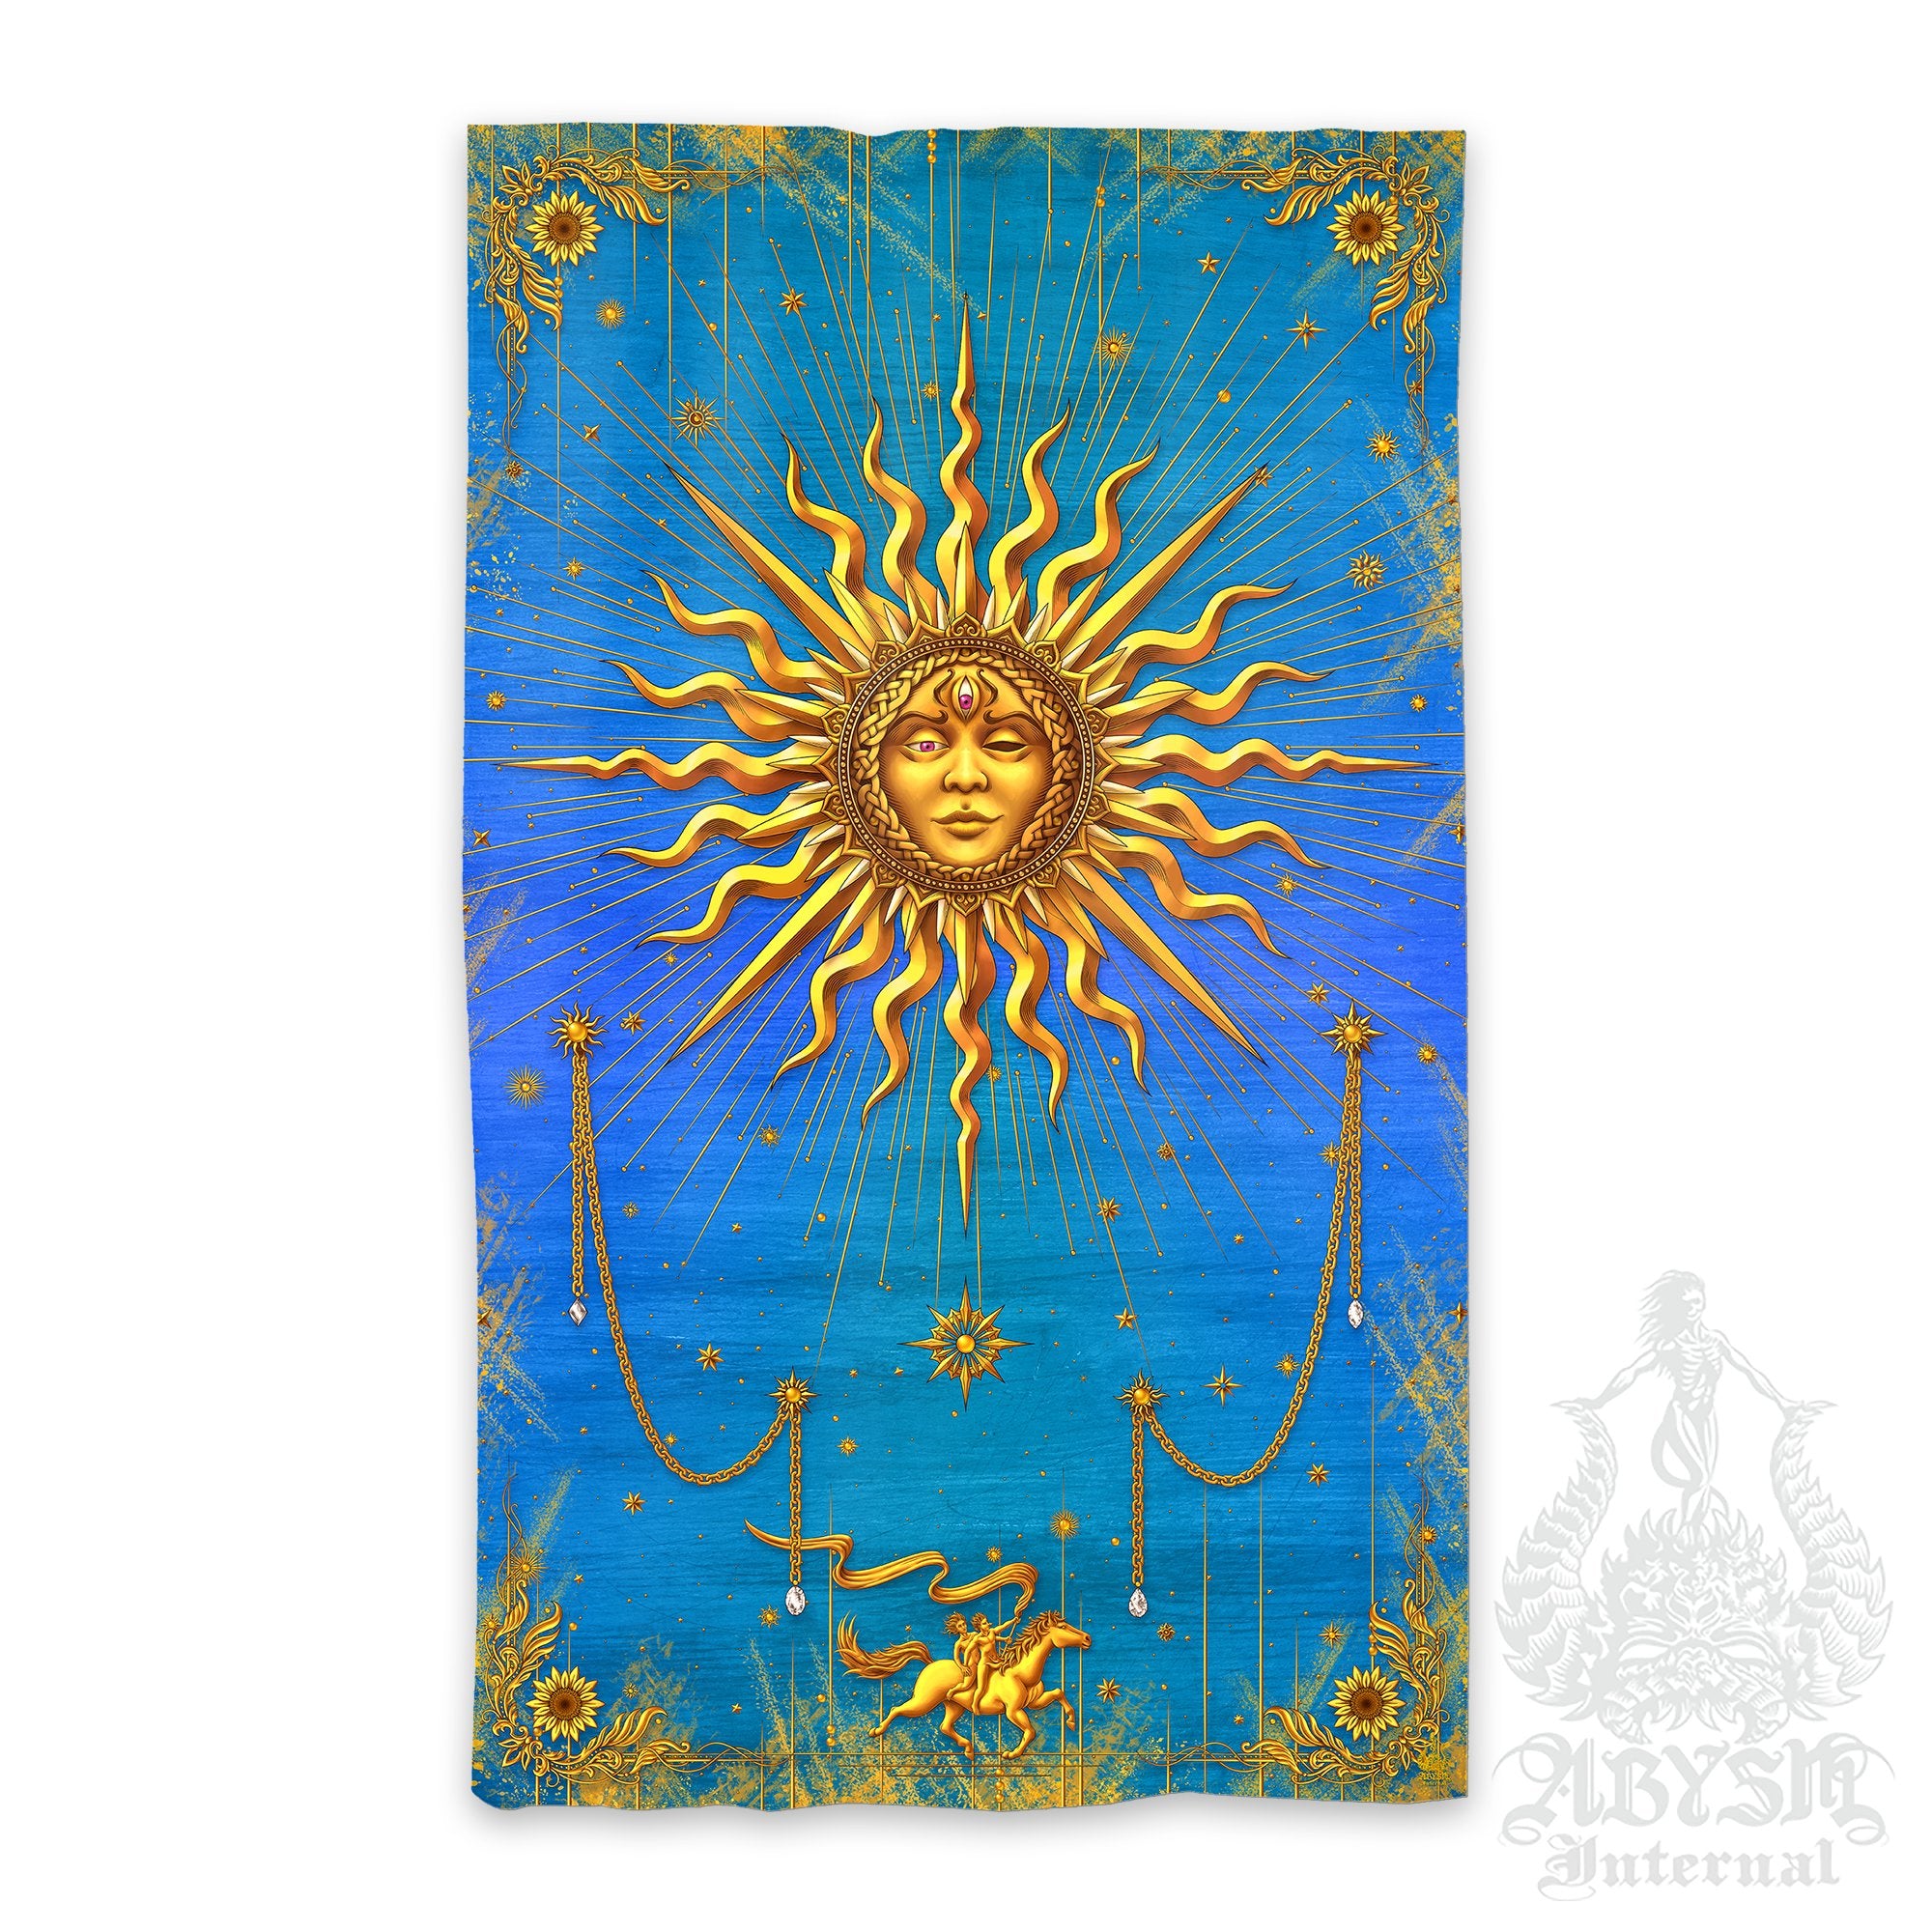 Gold Sun Curtains, 50x84' Printed Window Panels, Tarot Arcana, Esoteric Art Print , Boho and Indie Home Decor - 7 Colors - Abysm Internal